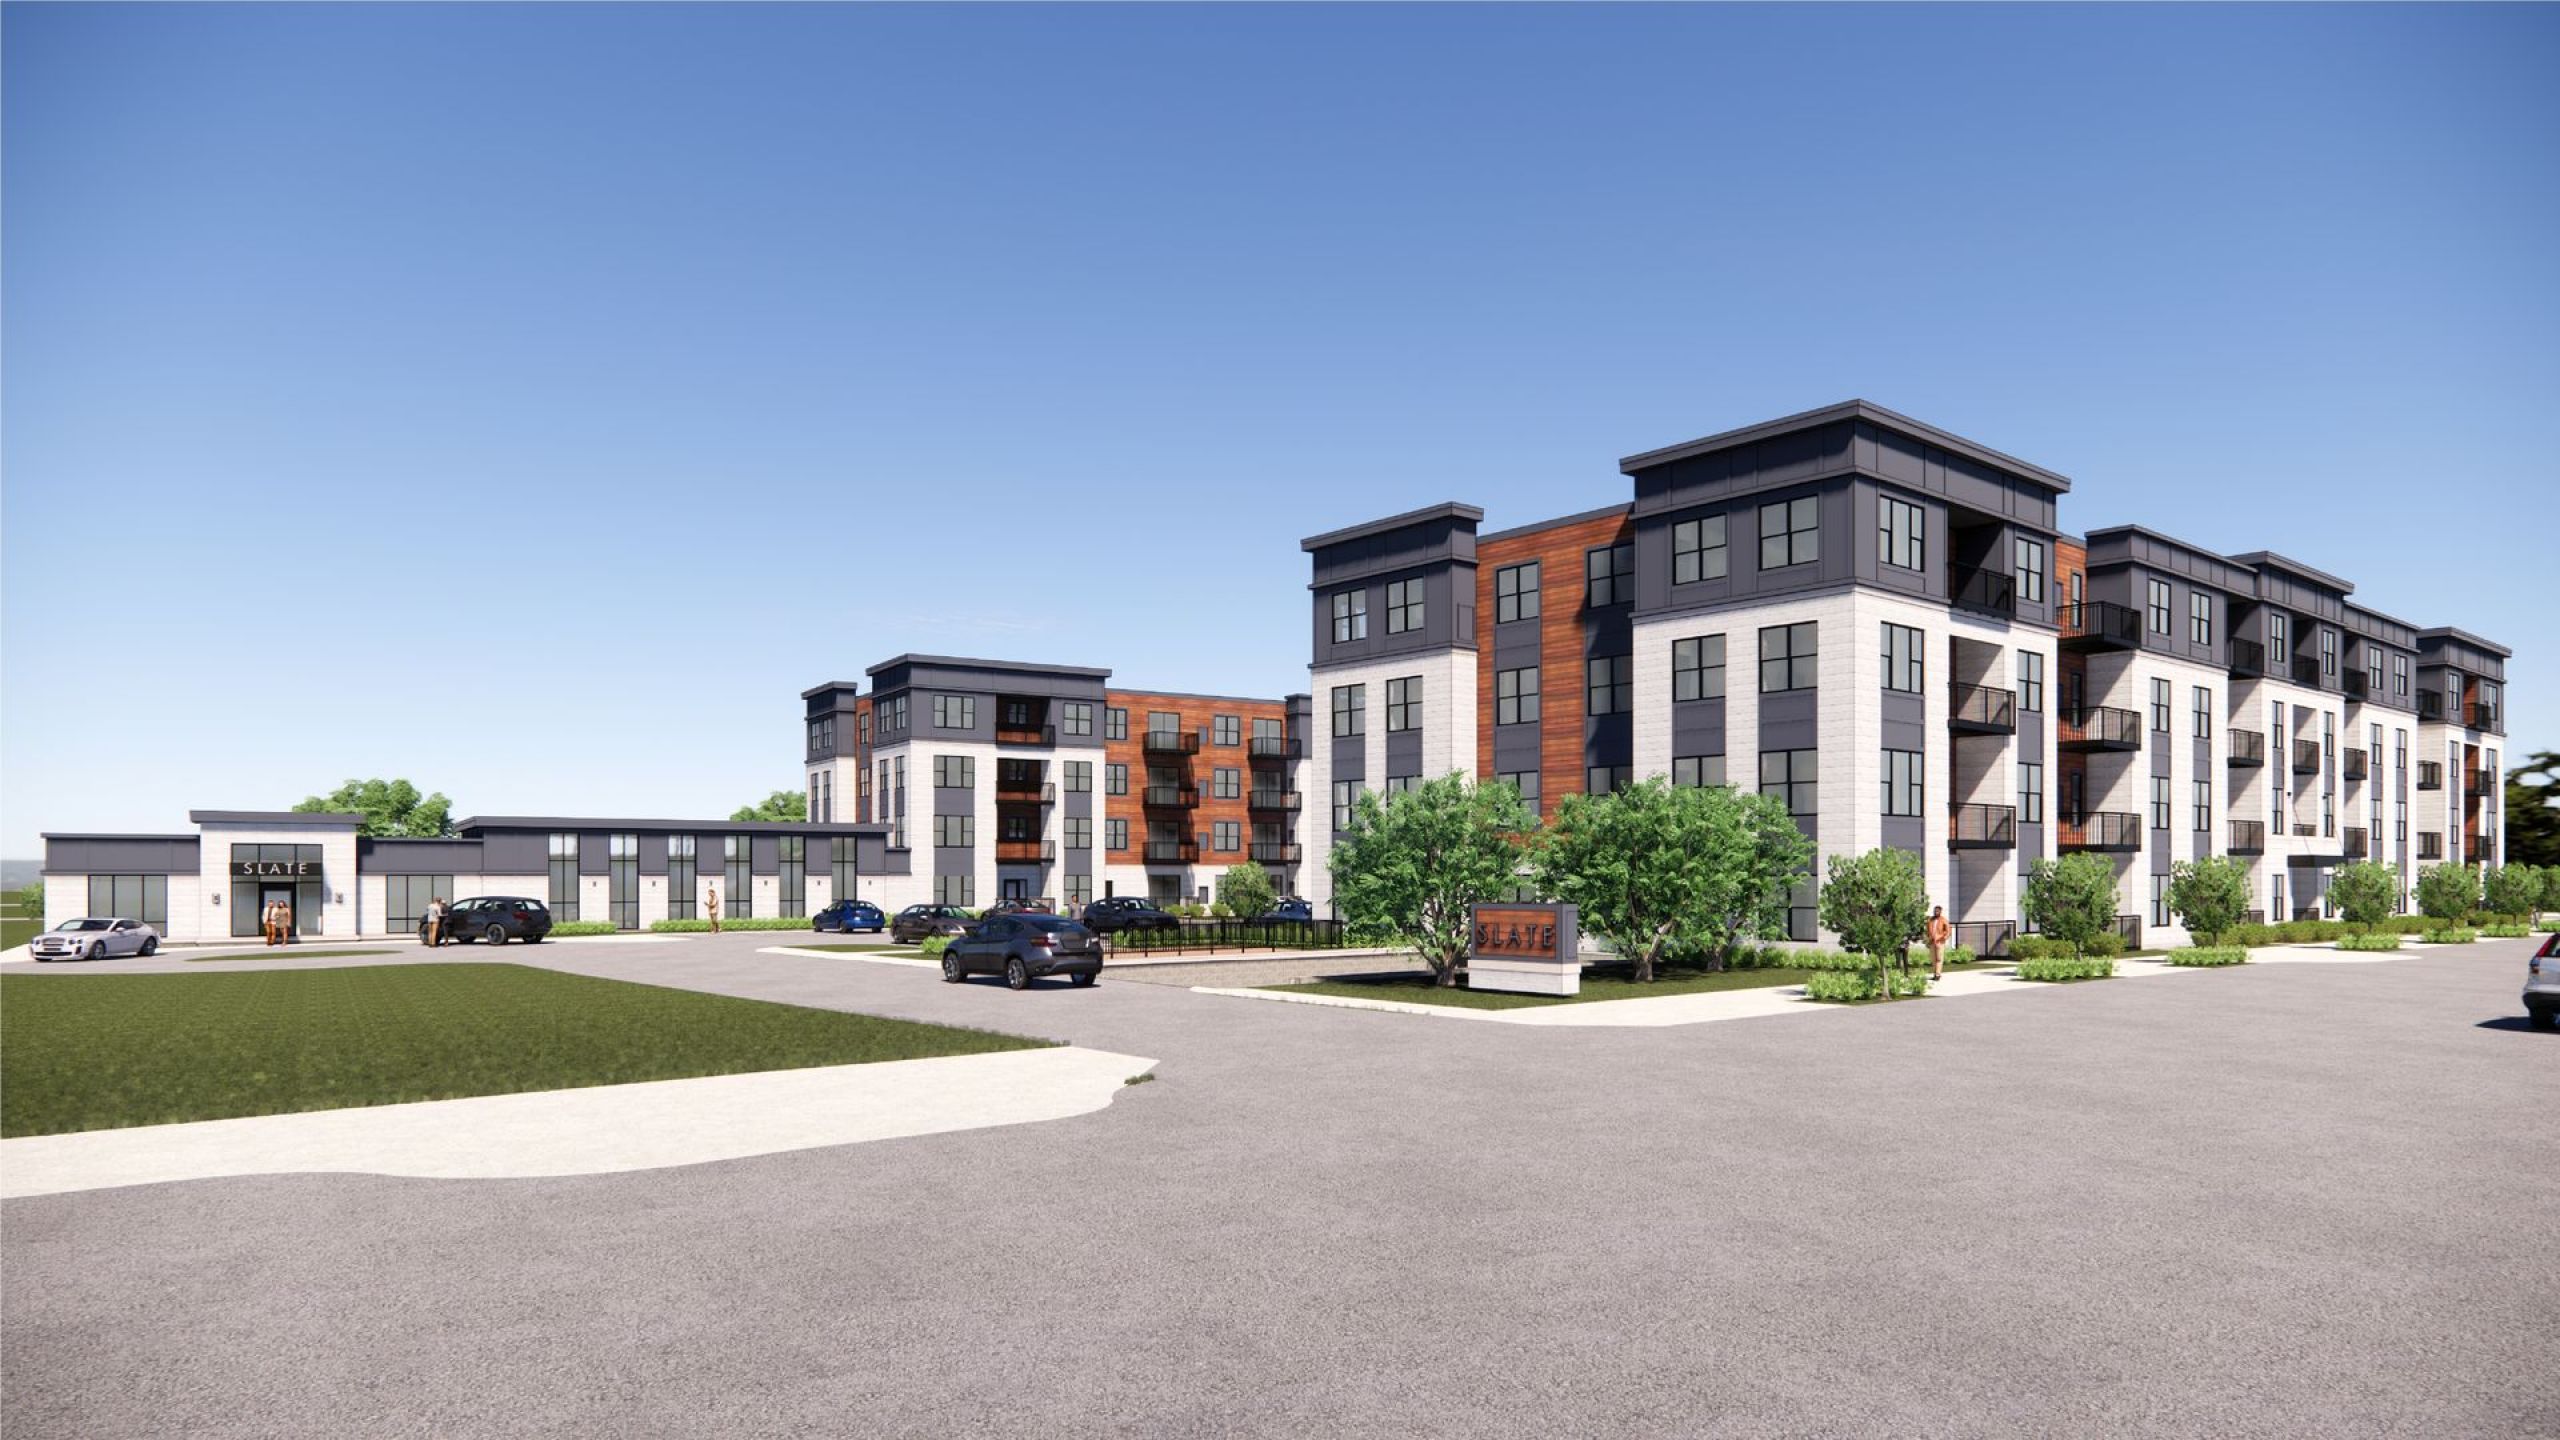 Rendering of the exterior of Slate apartments in Des Moines, IA